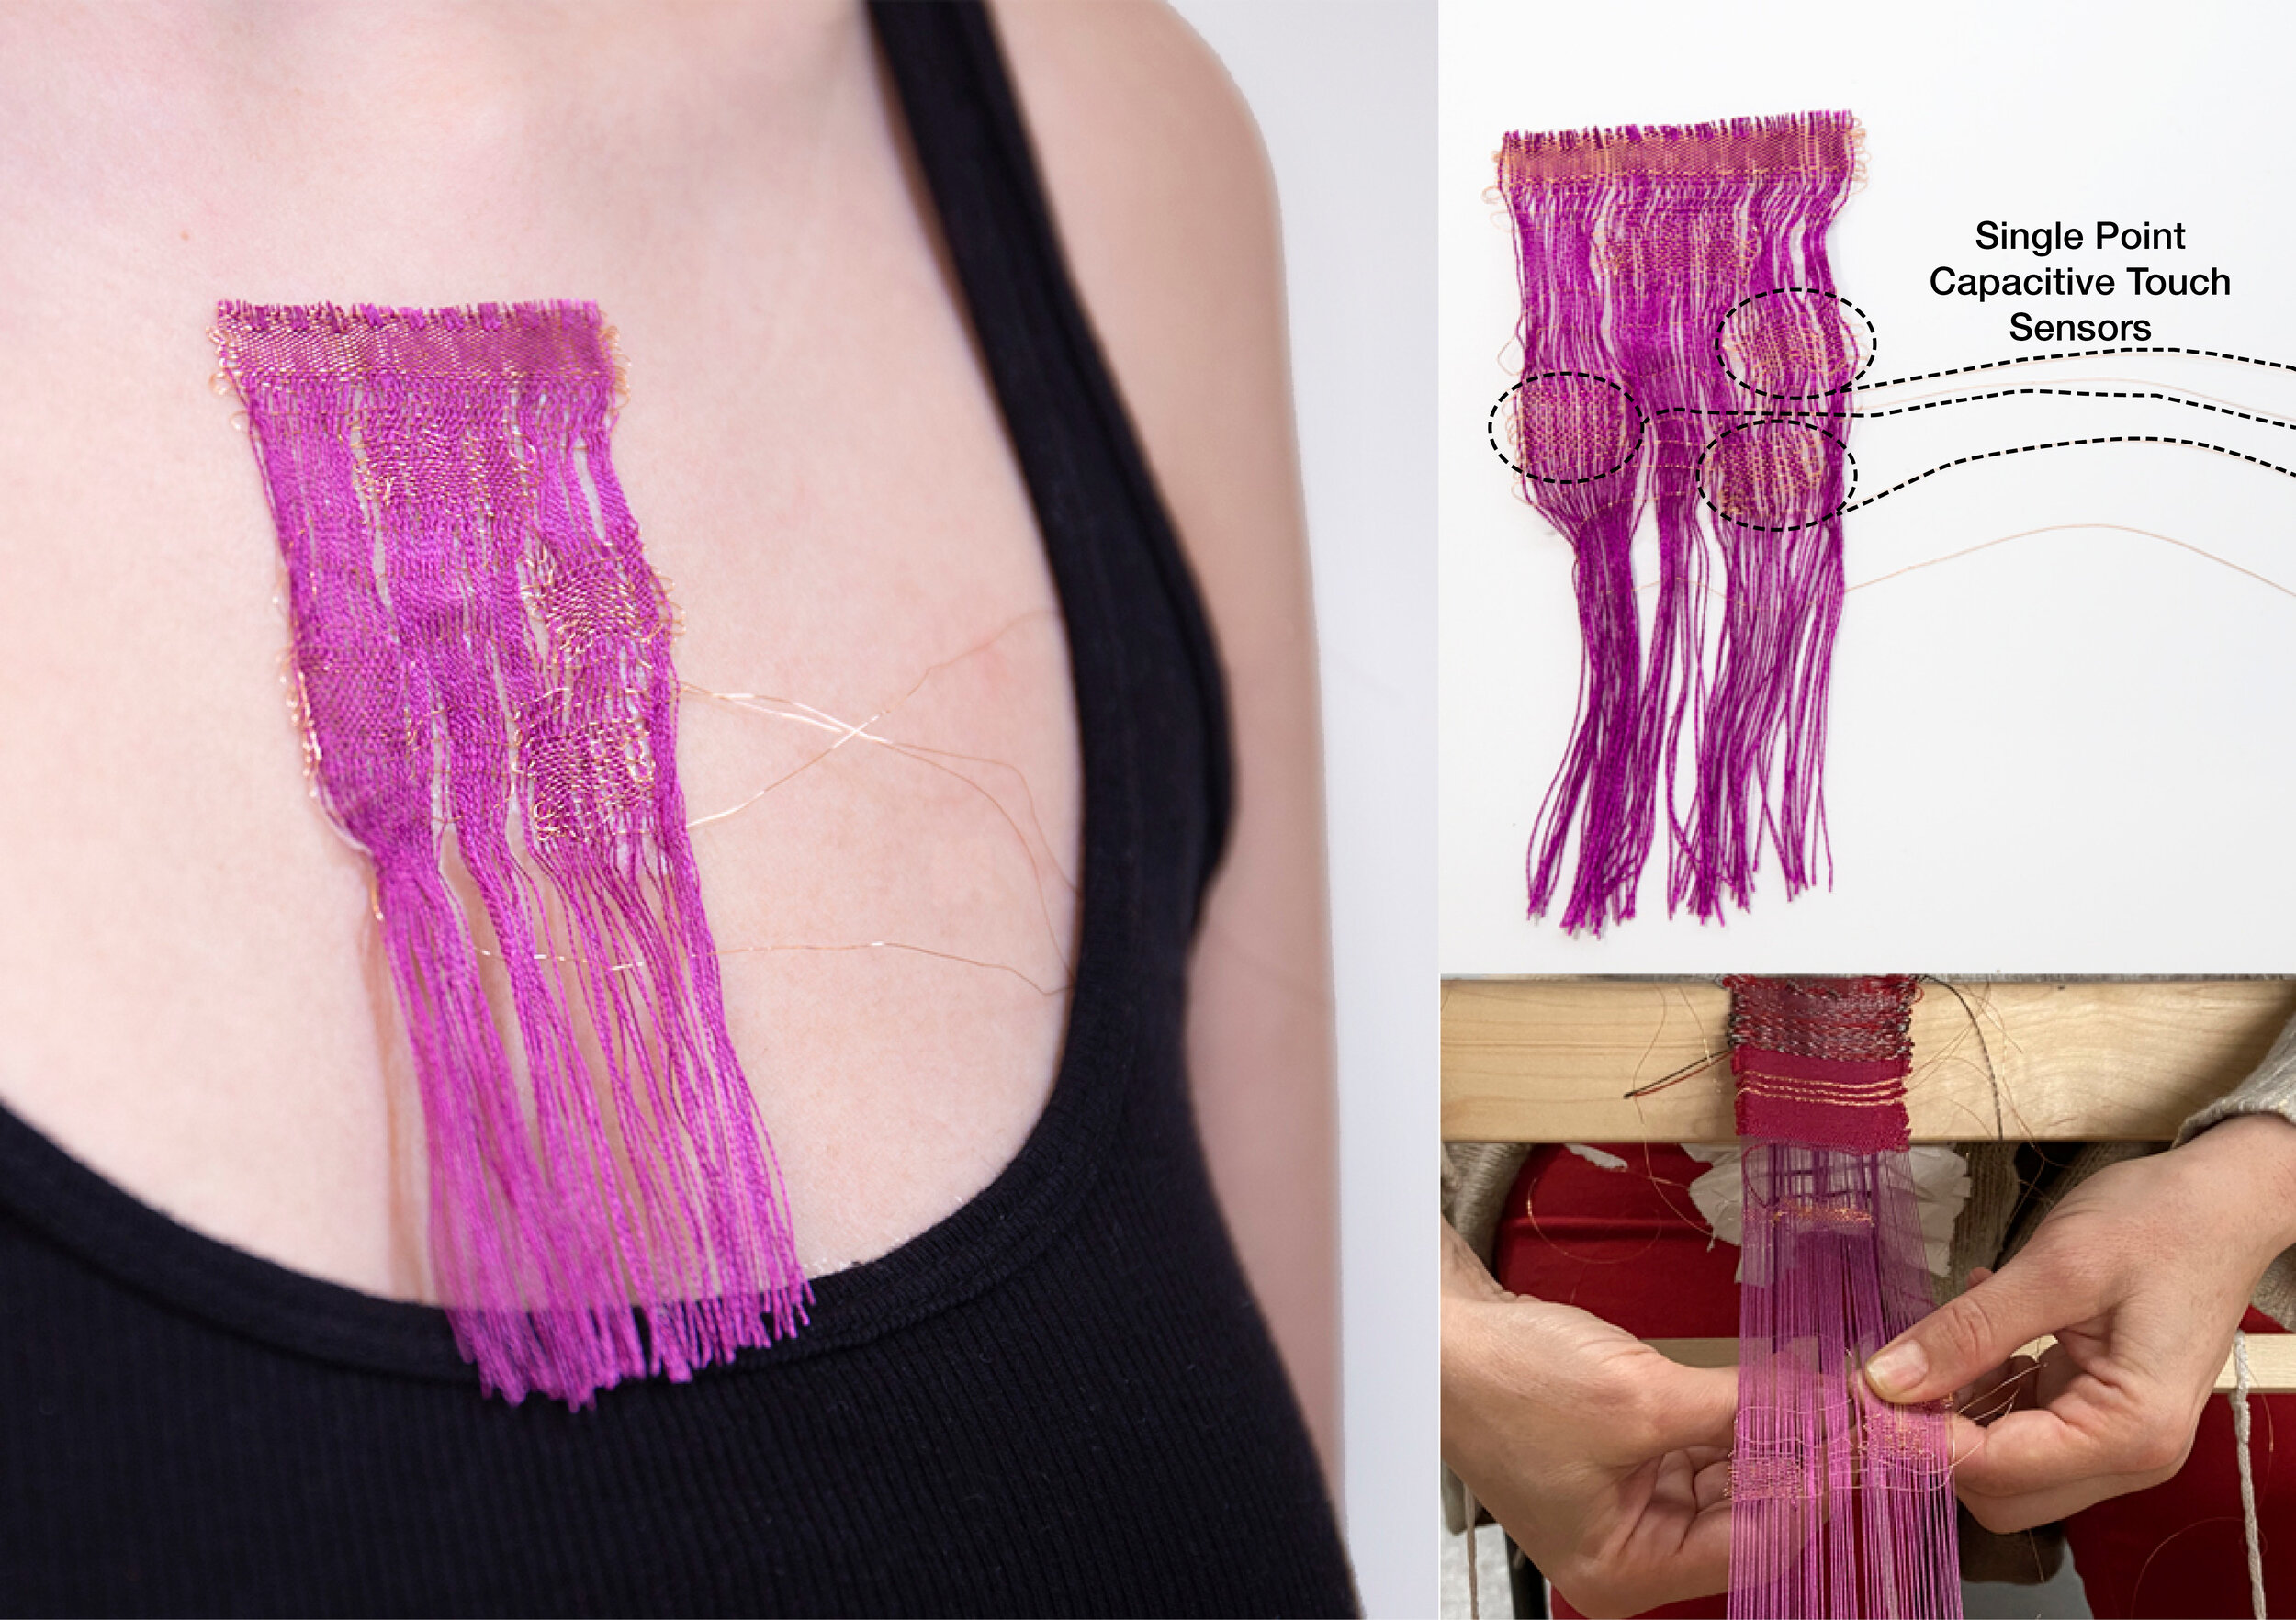  A textile artist’s woven on-skin interface created with the fabrication process developed by the Hybrid Body Lab: An on-skin touch sensor woven with fringes for a soothing tactile experience (Image Credit: Hybrid Body Lab) (License: CC BY-NC-SA 4.0)